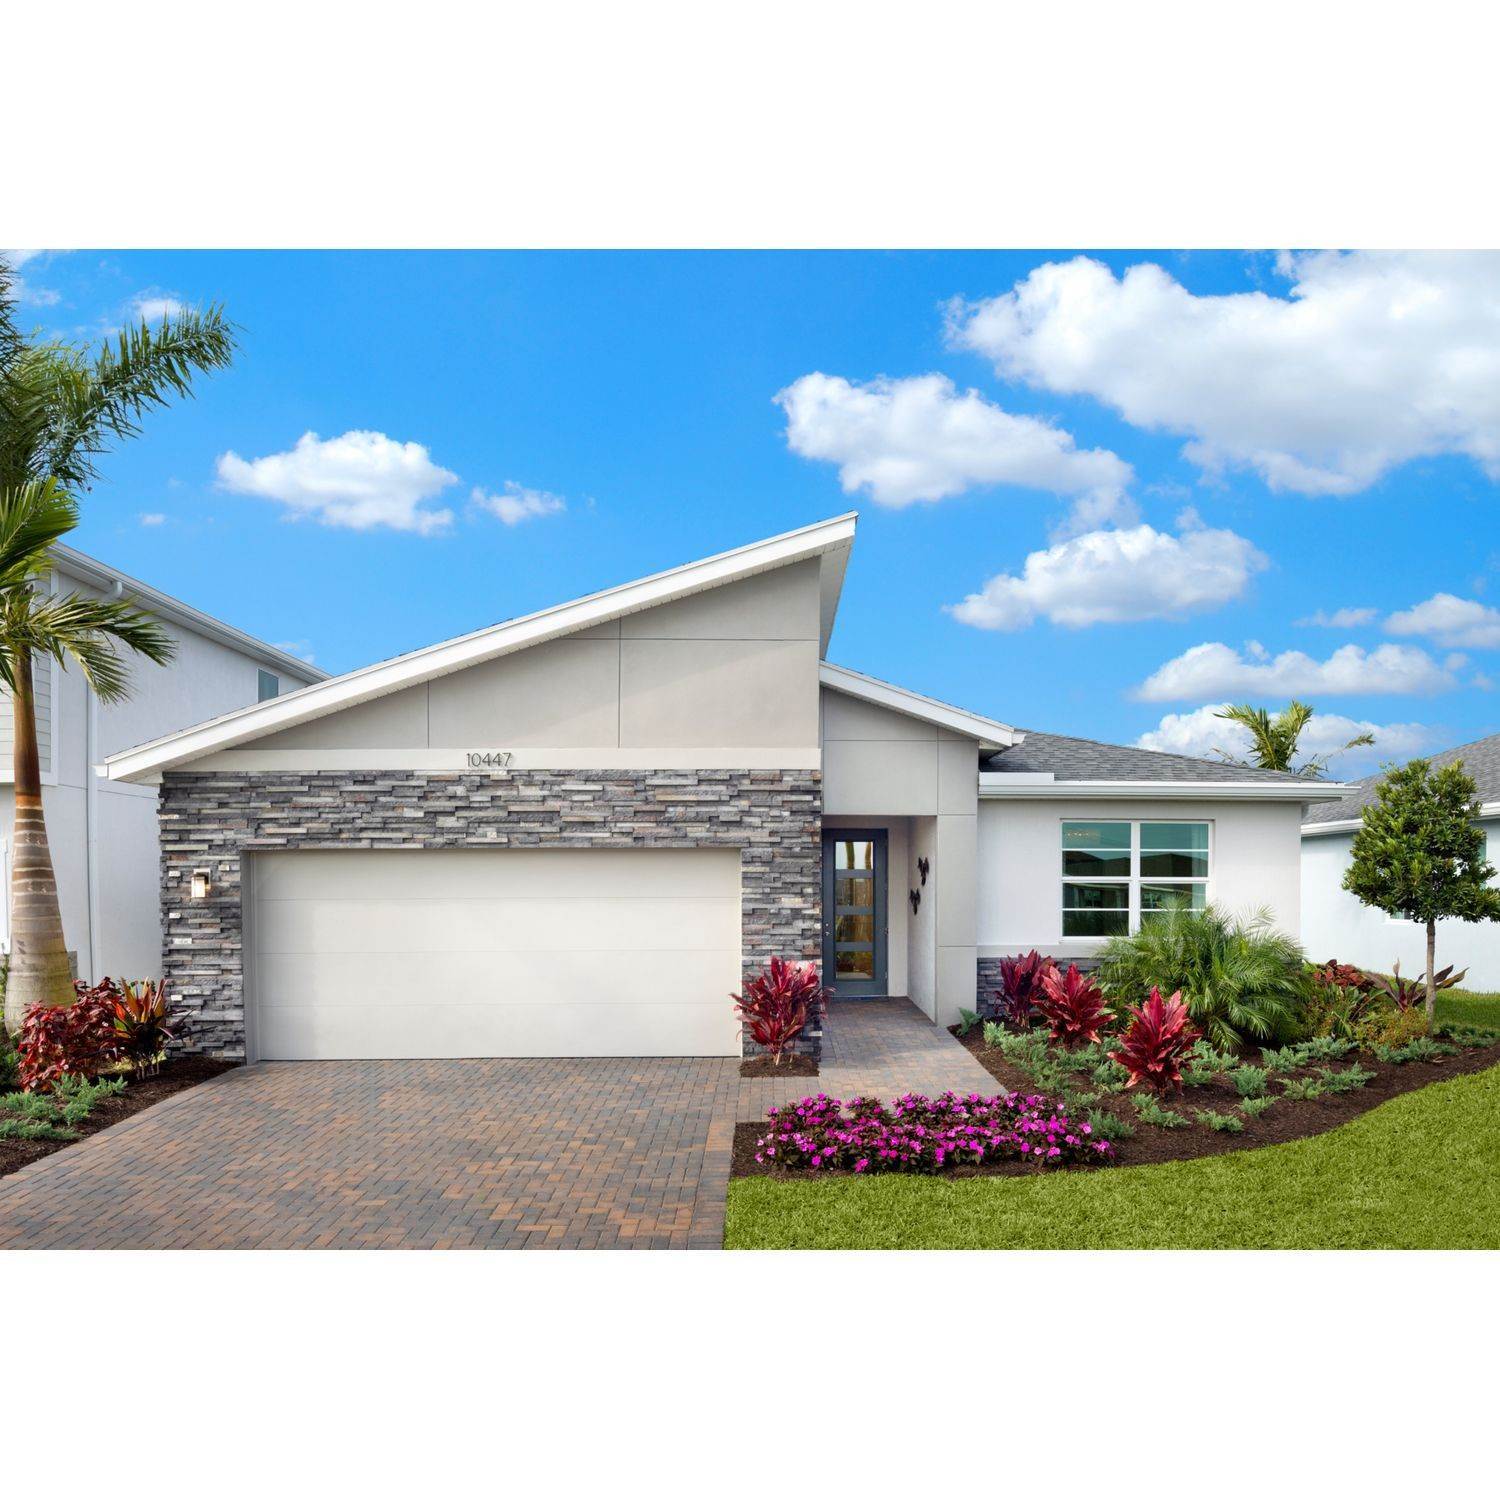 26. Soleil建於 1114 Turquoise Waves Cove, Kissimmee, FL 34747